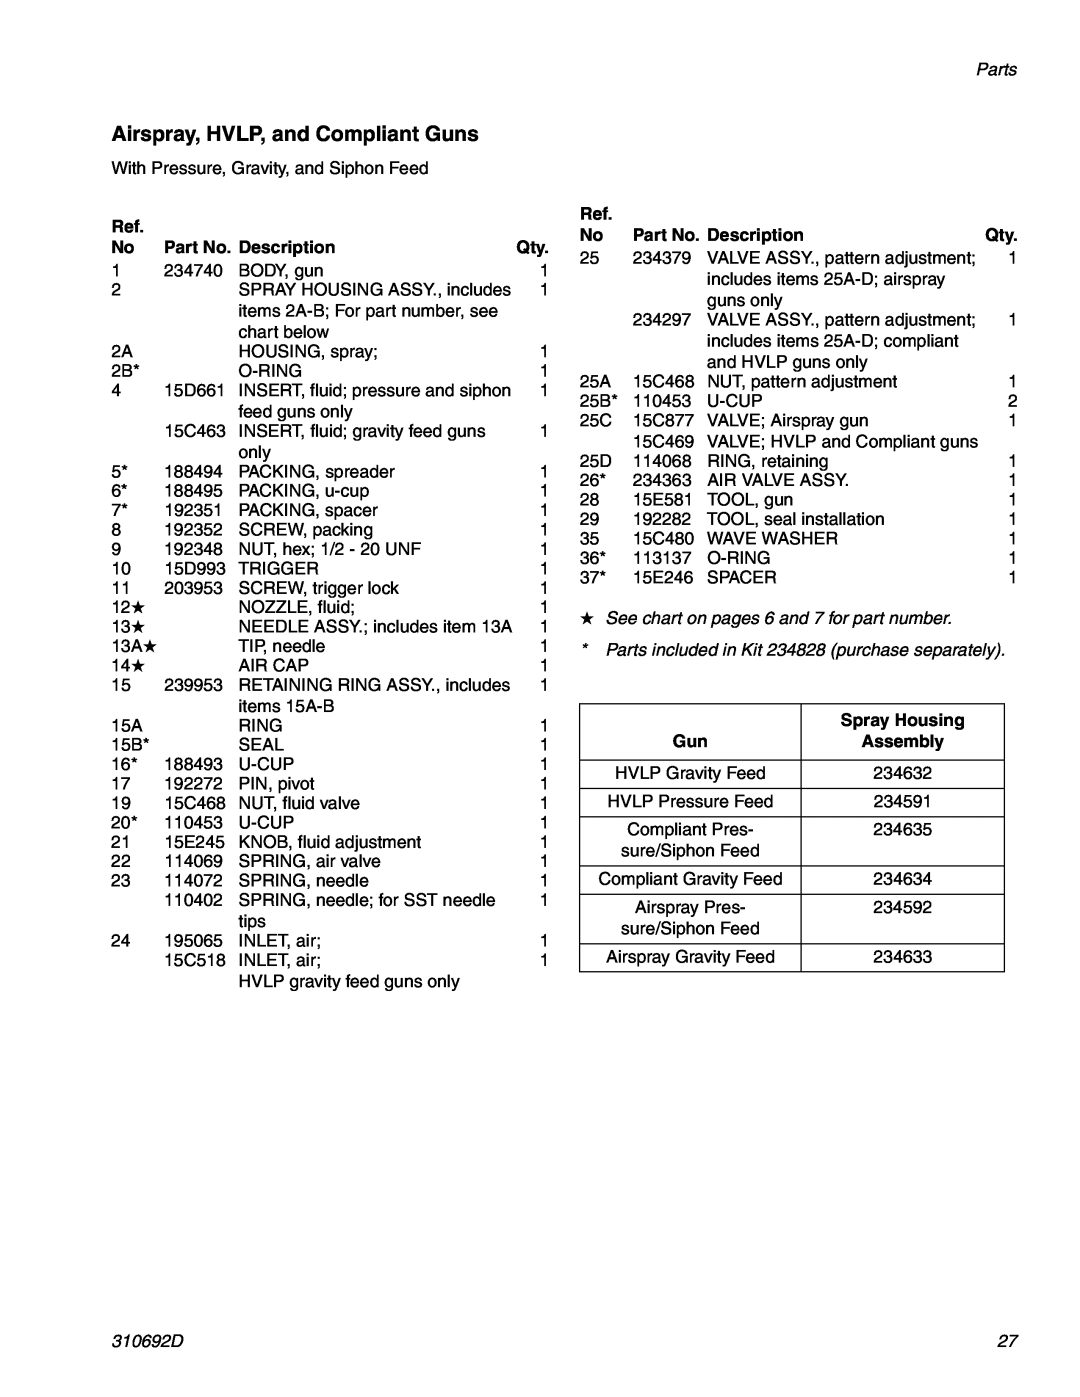 Graco 310692D Part No. Description, See chart on pages 6 and 7 for part number, Spray Housing, Assembly, Parts 